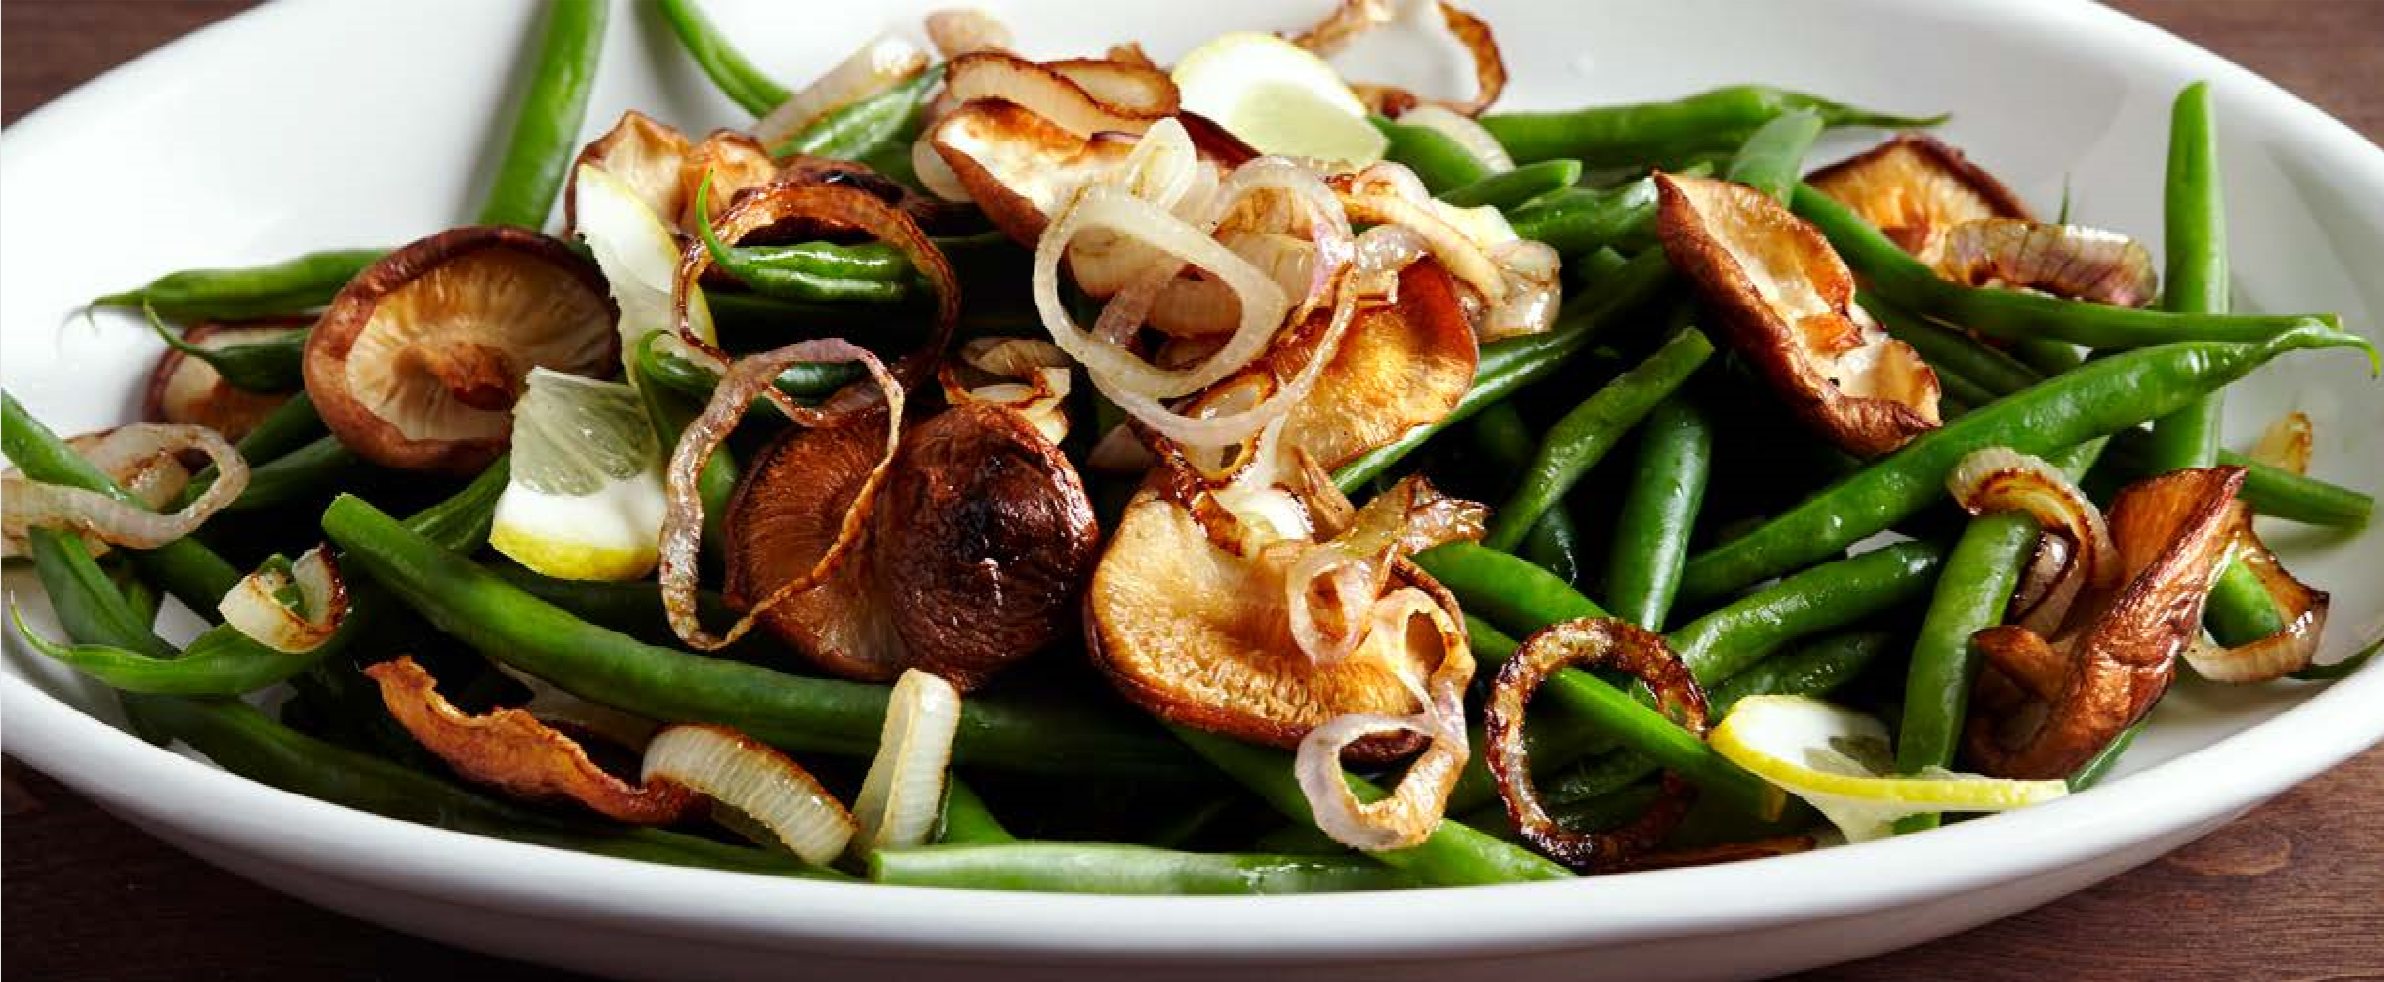 Green Beans with Crispy Shallots and Shiitake Mushrooms - GR8 LIFE CEO